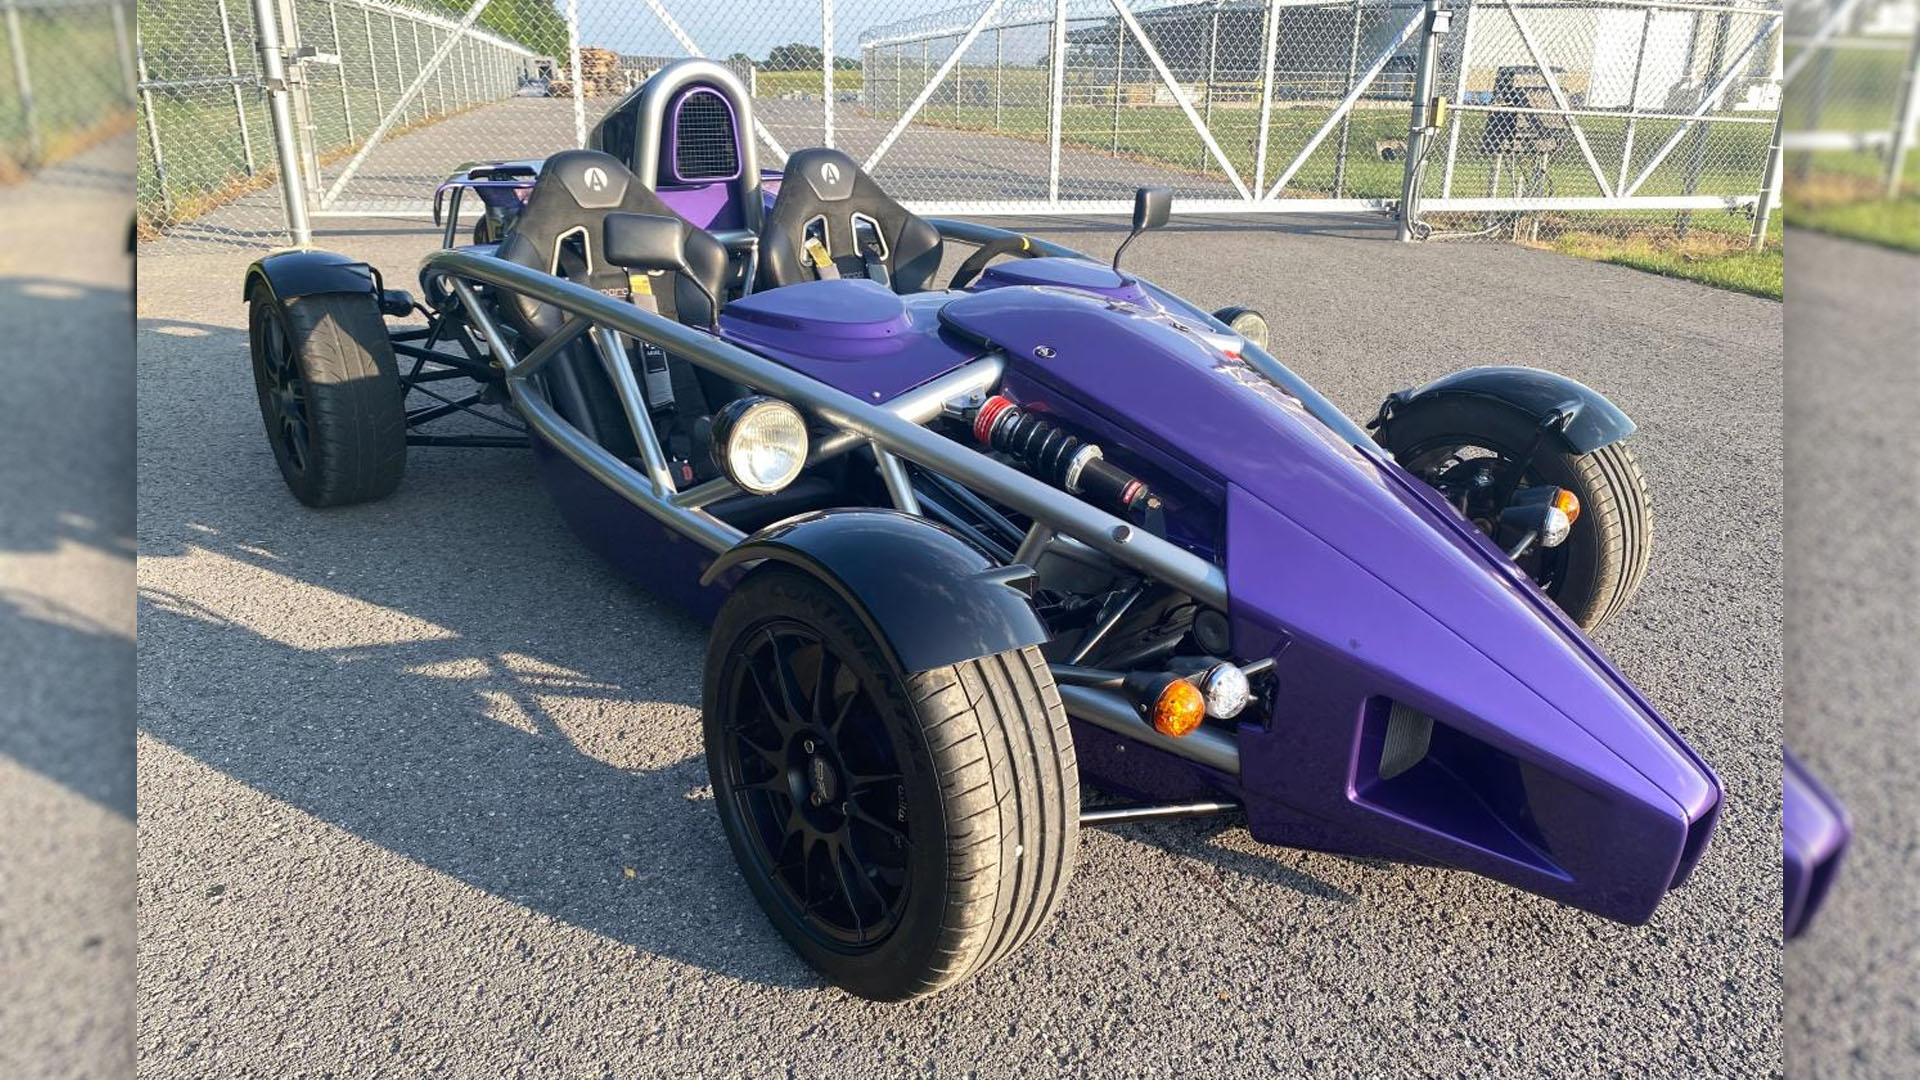 Rebuilt Ariel Atom on Copart Could Be Your Next Cheap Track Toy